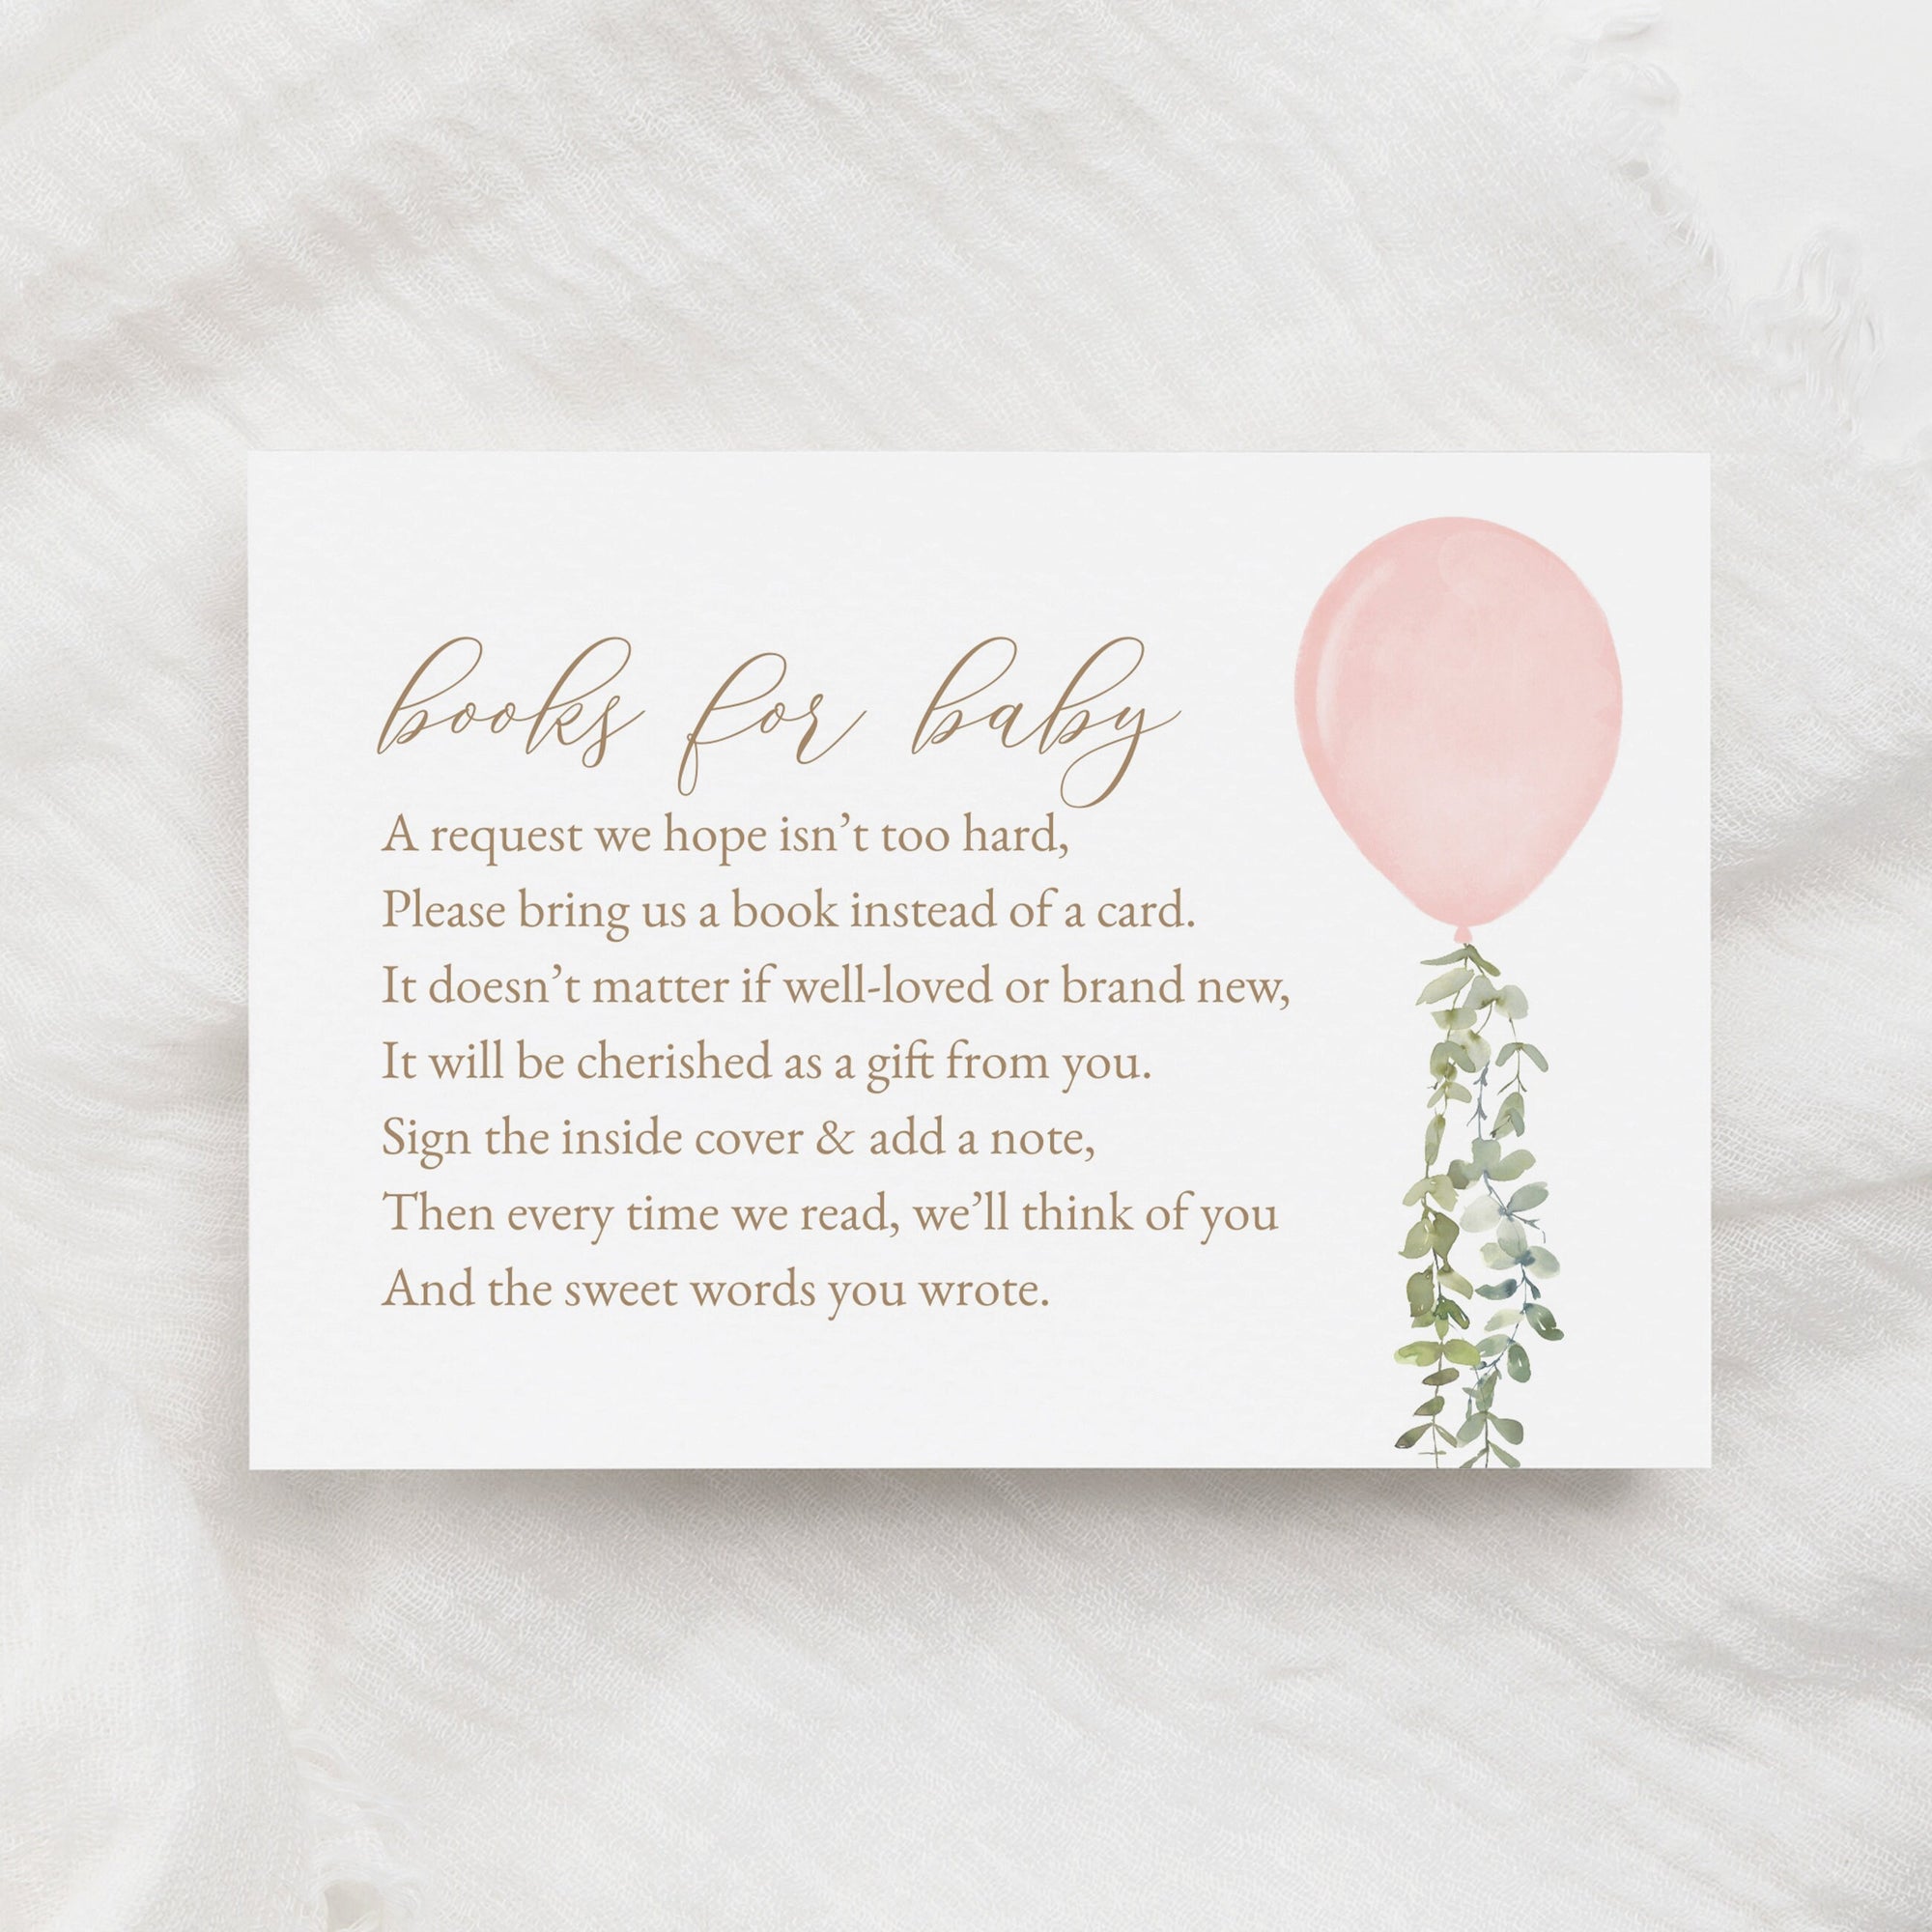 Pink Balloon Books for Baby Card Template, Watercolor Balloon Baby Shower Book Request Insert, Printable Template, DIGITAL DOWNLOAD